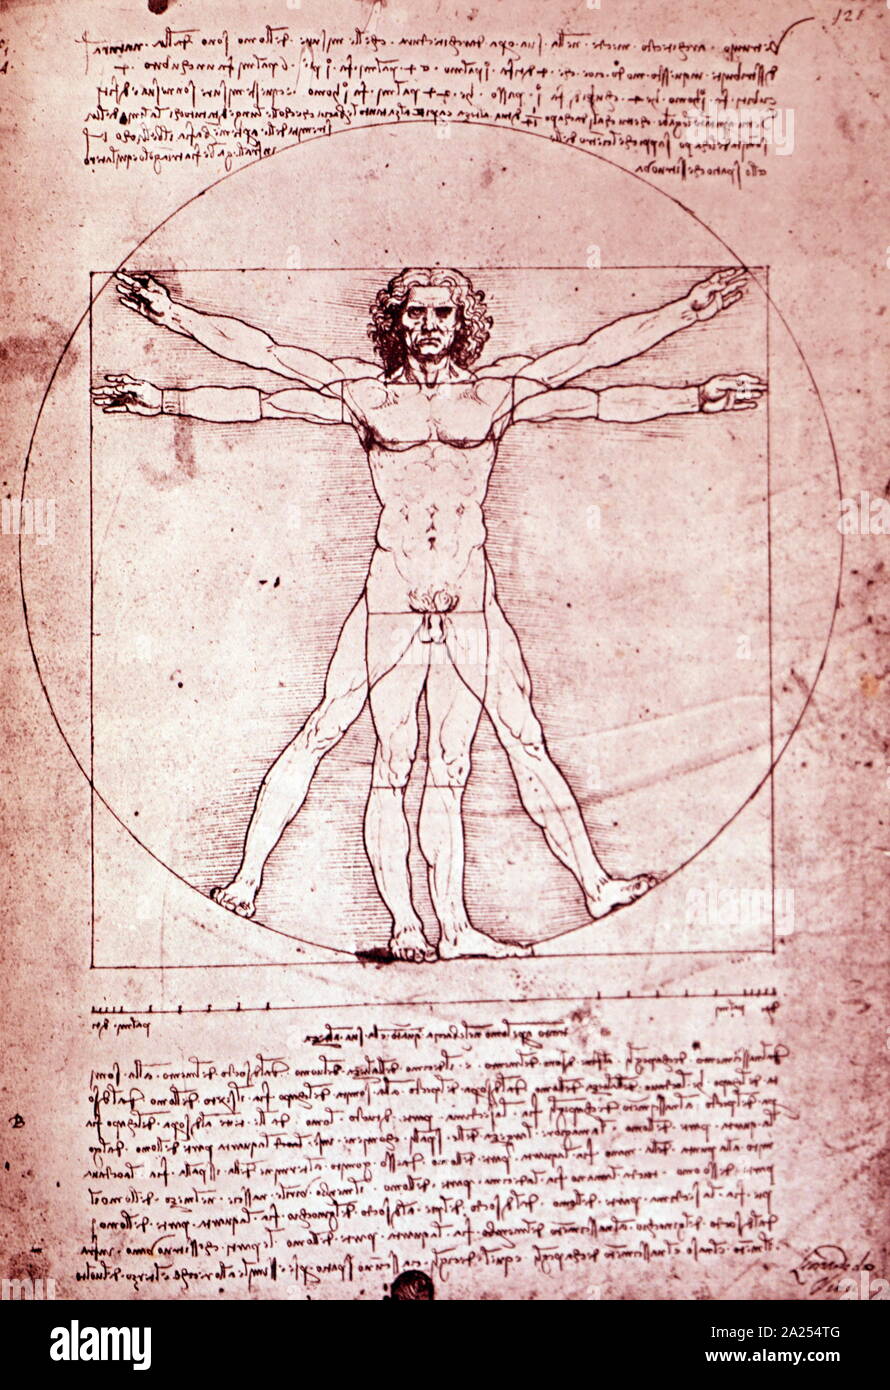 The Vitruvian Man, 1490; Pen and ink. Circa 1514-16. By Leonardo da Vinci (1452 - 1519), the Italian Renaissance polymath. The Vitruvian Man is accompanied by notes based on the work of the architect Vitruvius. The drawing and text are sometimes called the Canon of Proportions or, less often, Proportions of Man. Da Vinci was expert in invention, painting, architecture, science and engineering. considered one of the greatest painters of all time he epitomised the Renaissance humanist ideal. Stock Photo